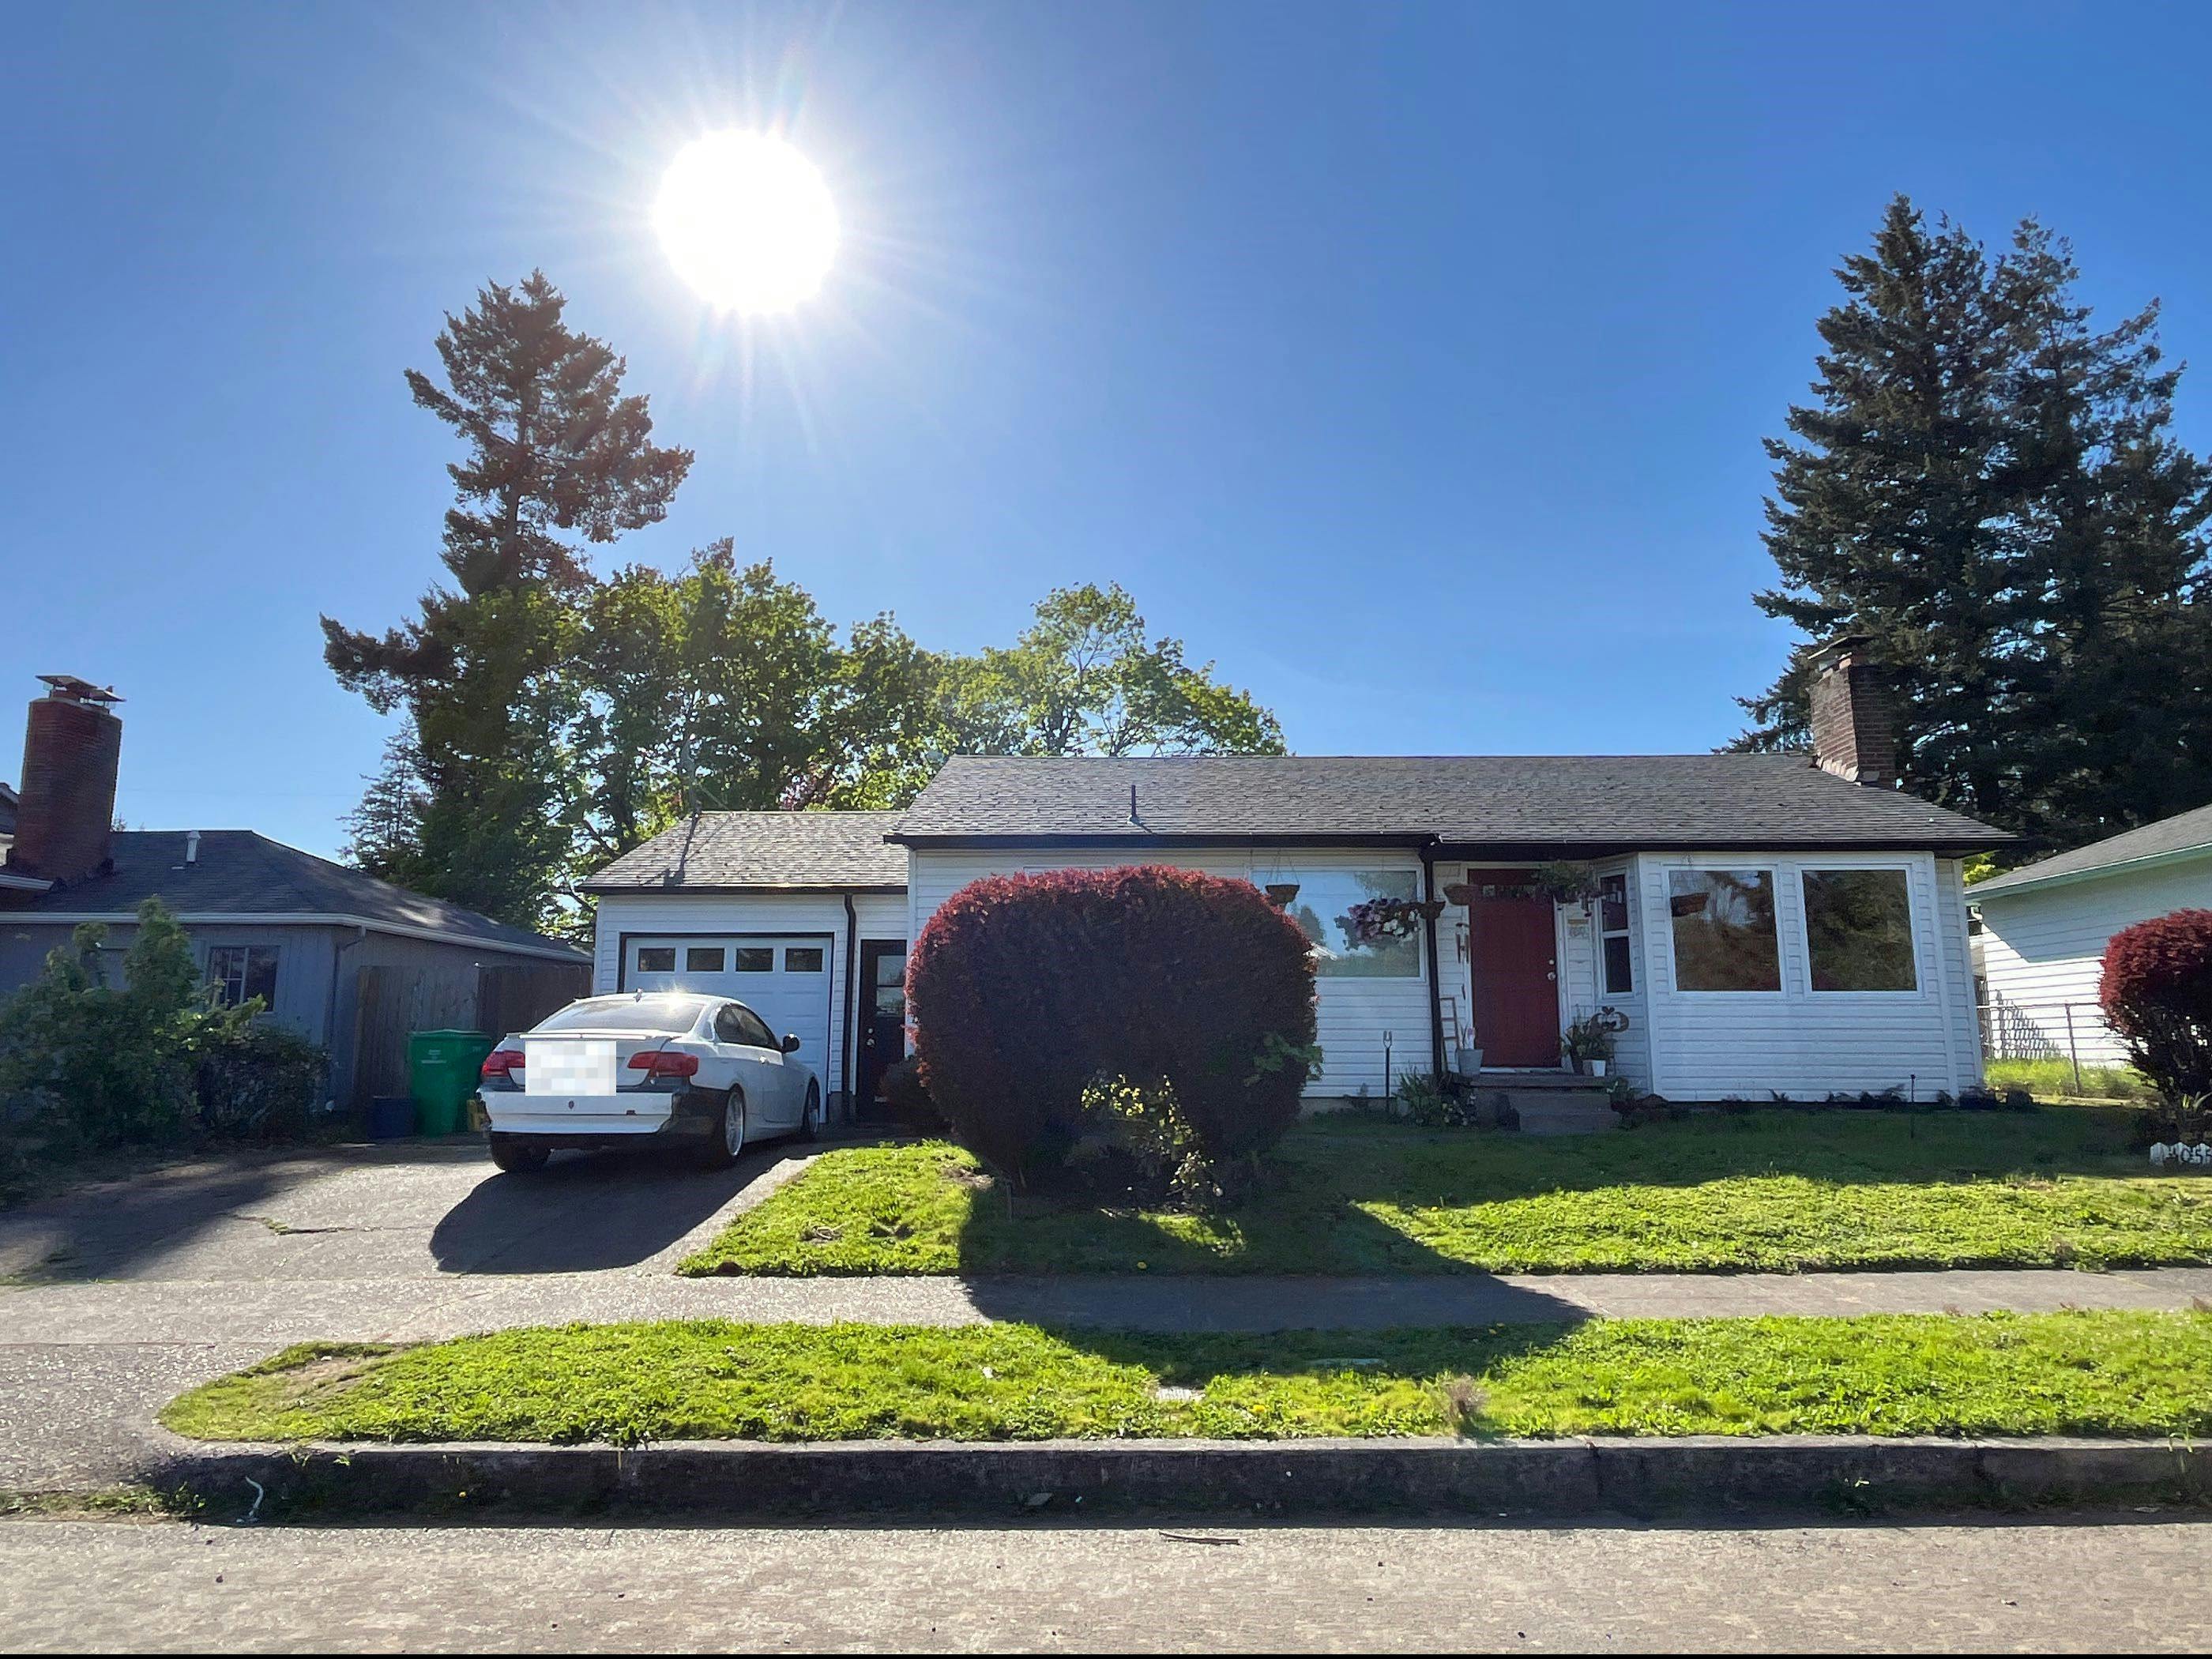 103rd Ave, Portland, OR 97266